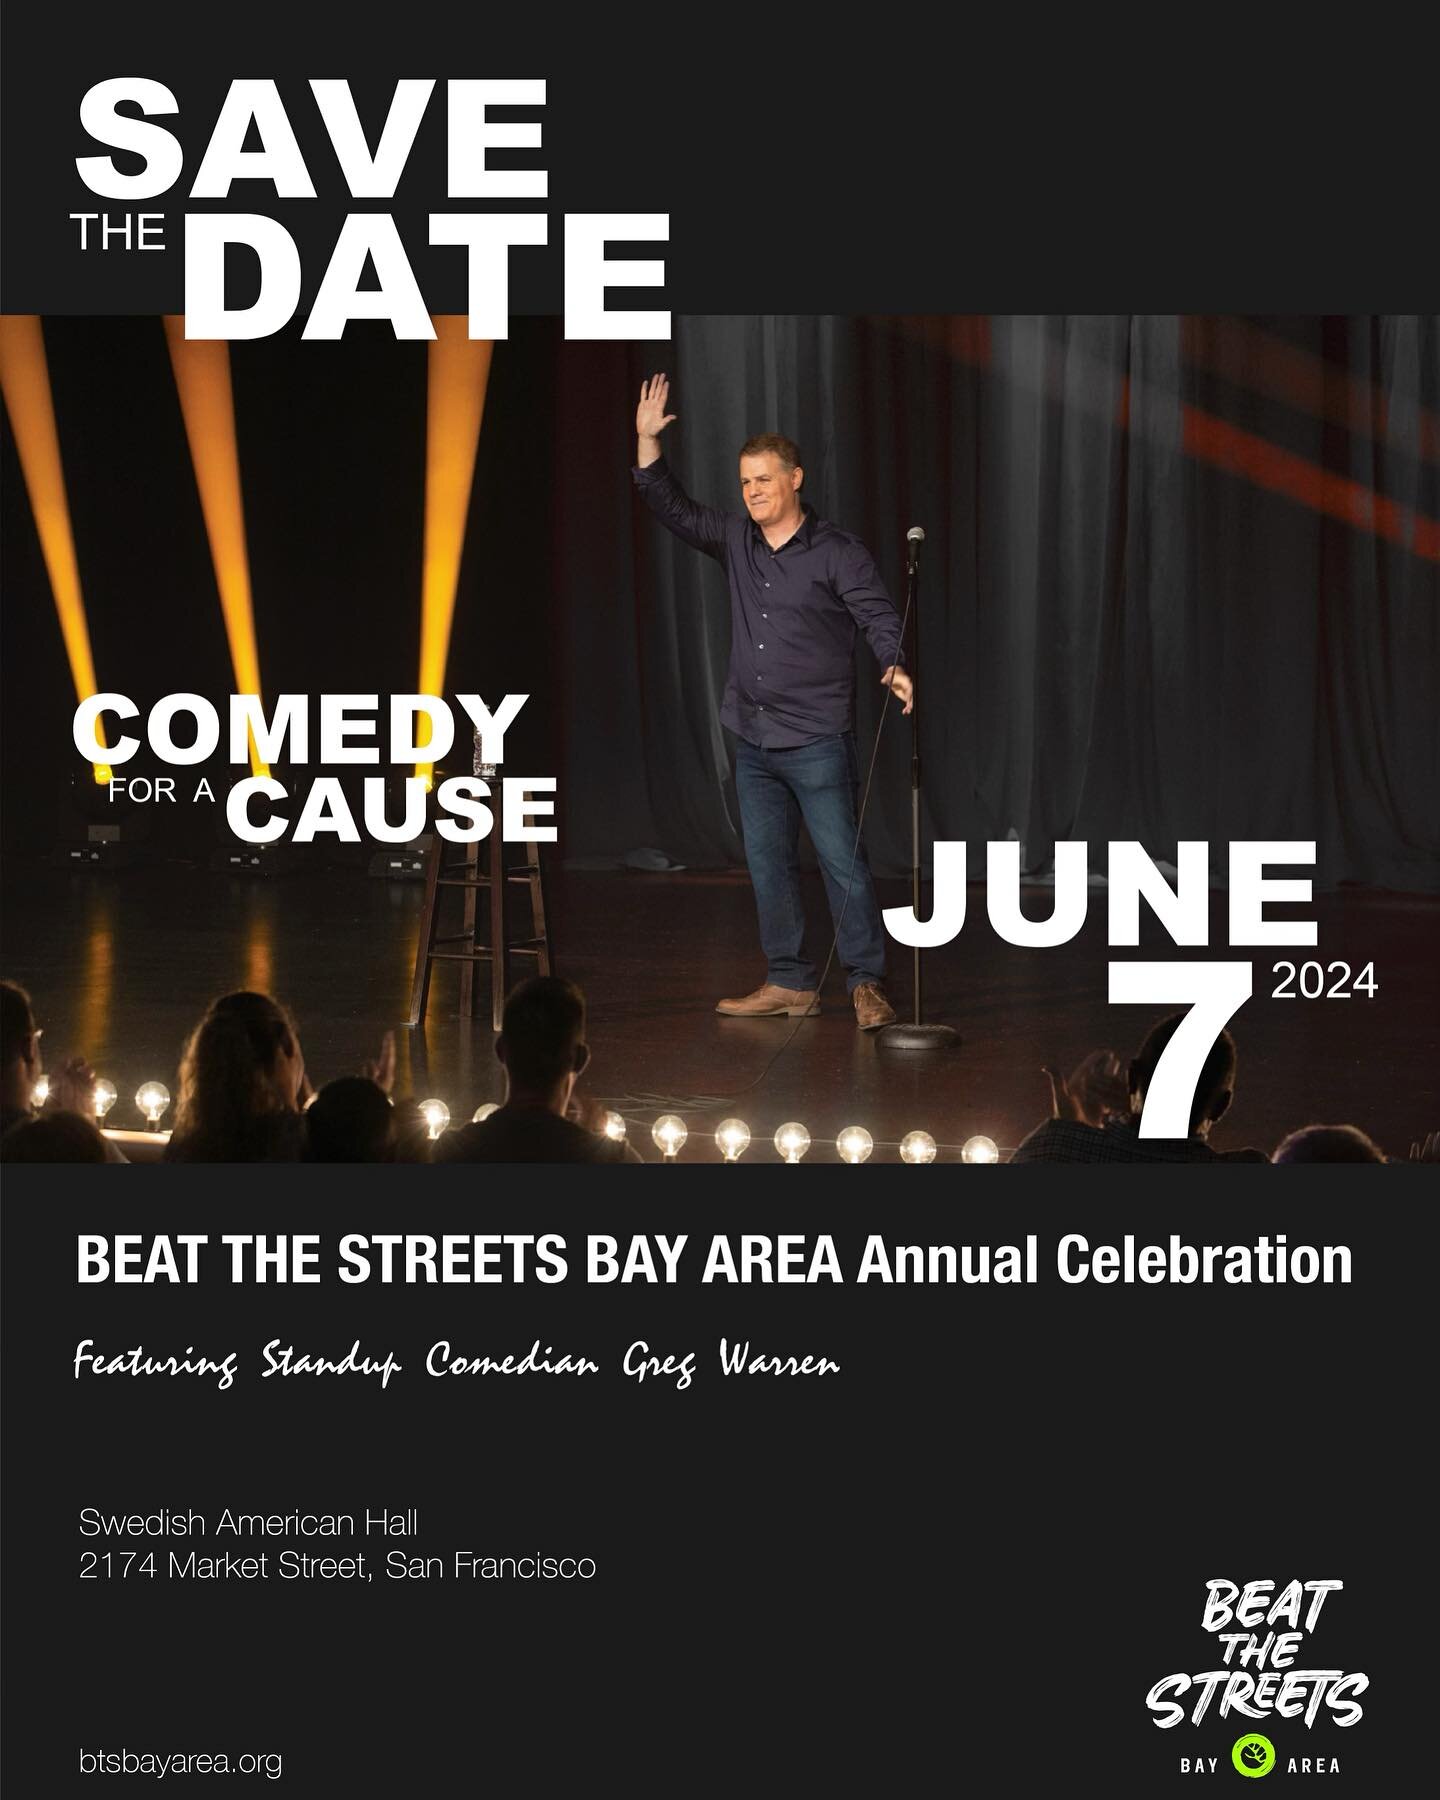 Mark your calendars for our Annual Celebration where laughter takes center stage! It's Comedy For A Cause with @grockwarren that'll have you rolling on the floor &ndash; no pins required, just plenty of chuckles guaranteed!

On 𝗝𝘂𝗻𝗲 𝟳𝘁𝗵 𝟮𝟬𝟮